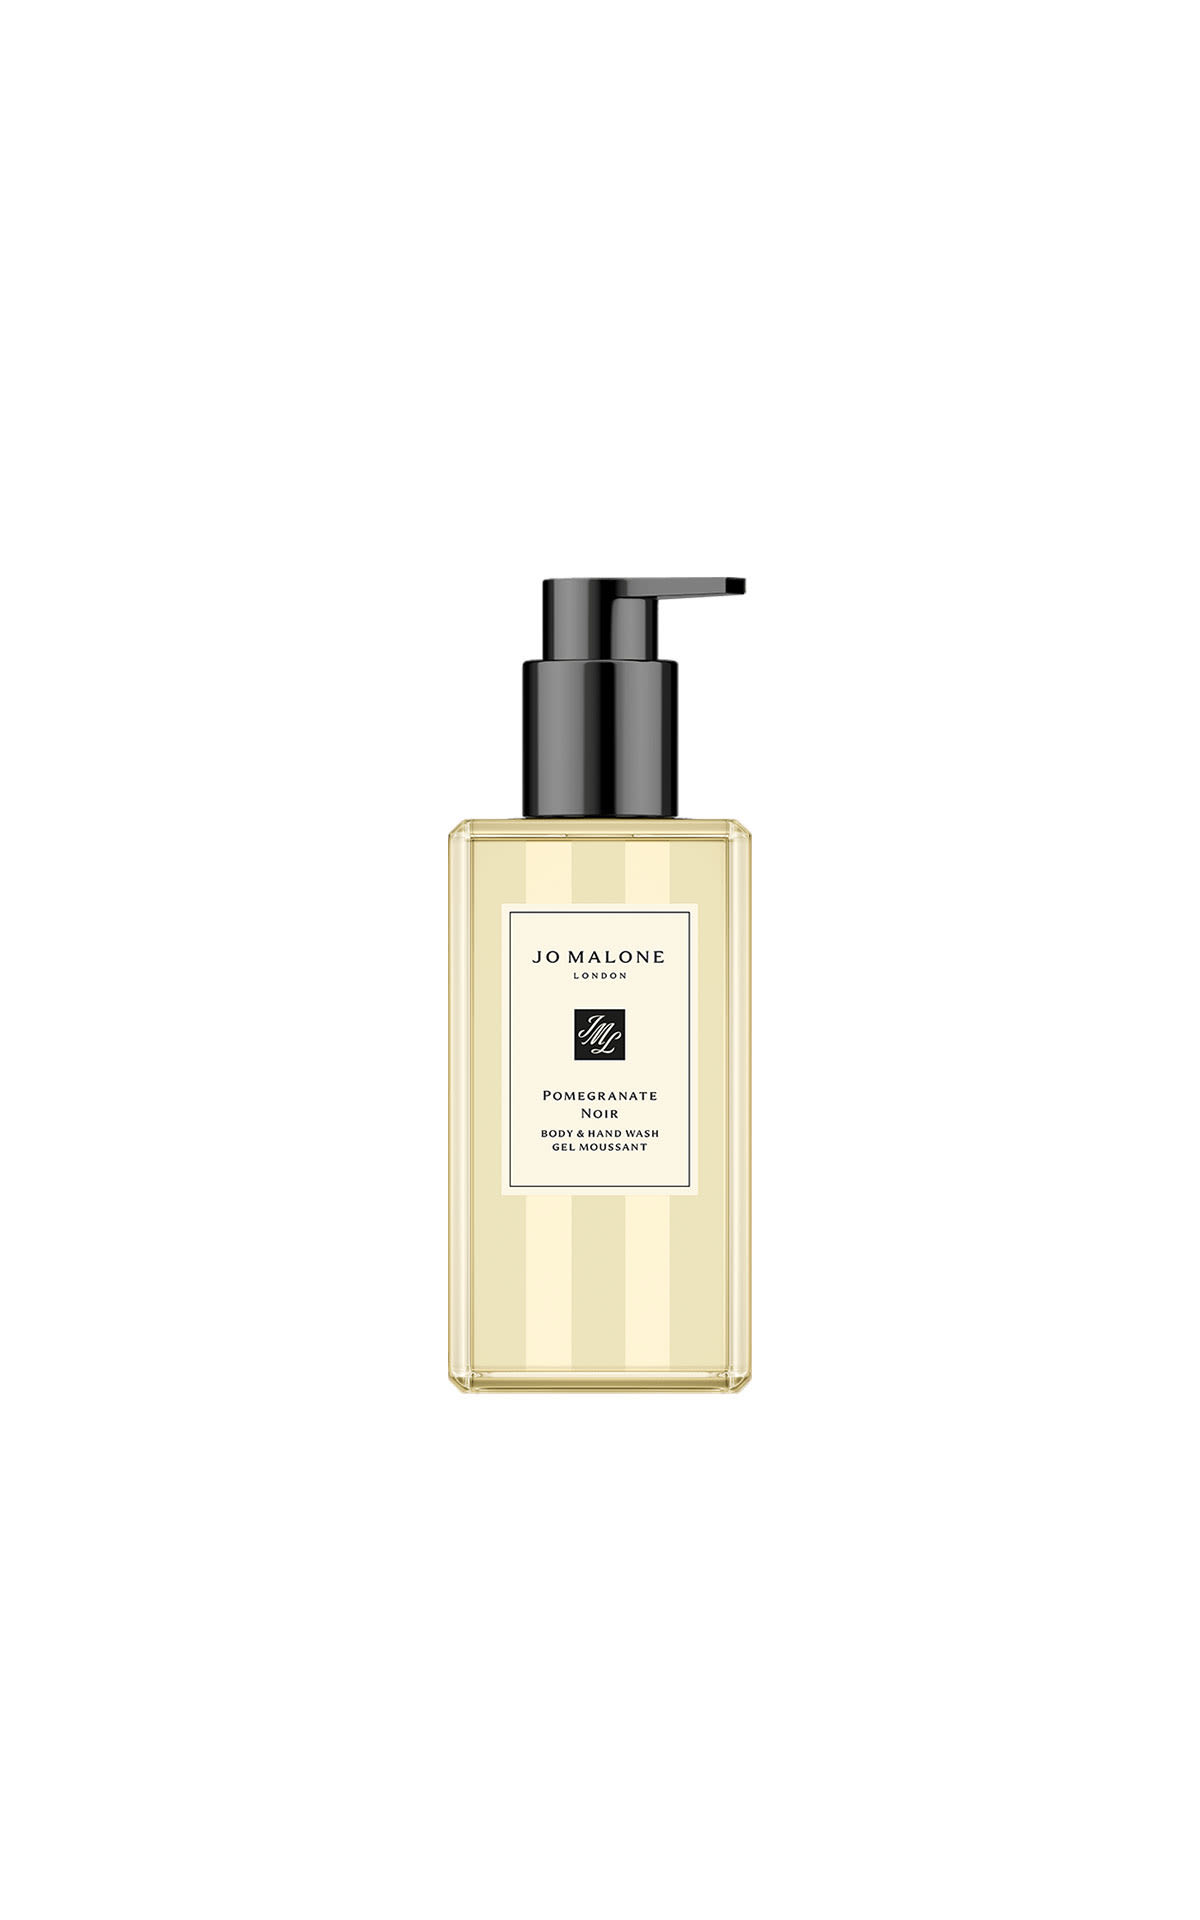 Jo Malone Pomegranate noir body and hand wash from Bicester Village